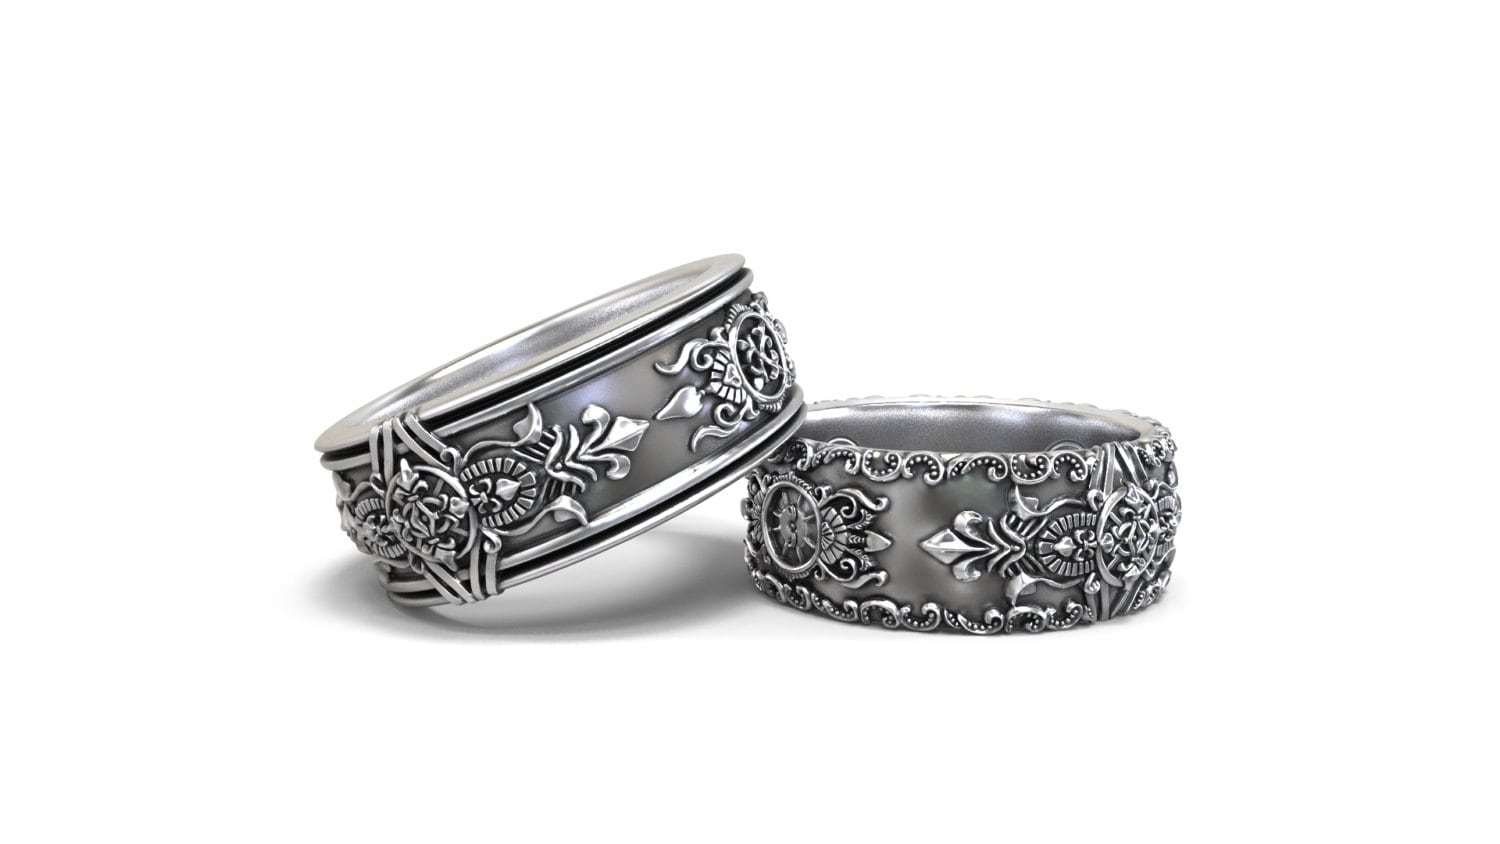 Gothic wedding bands his and hers set by GreyWolfJewellery